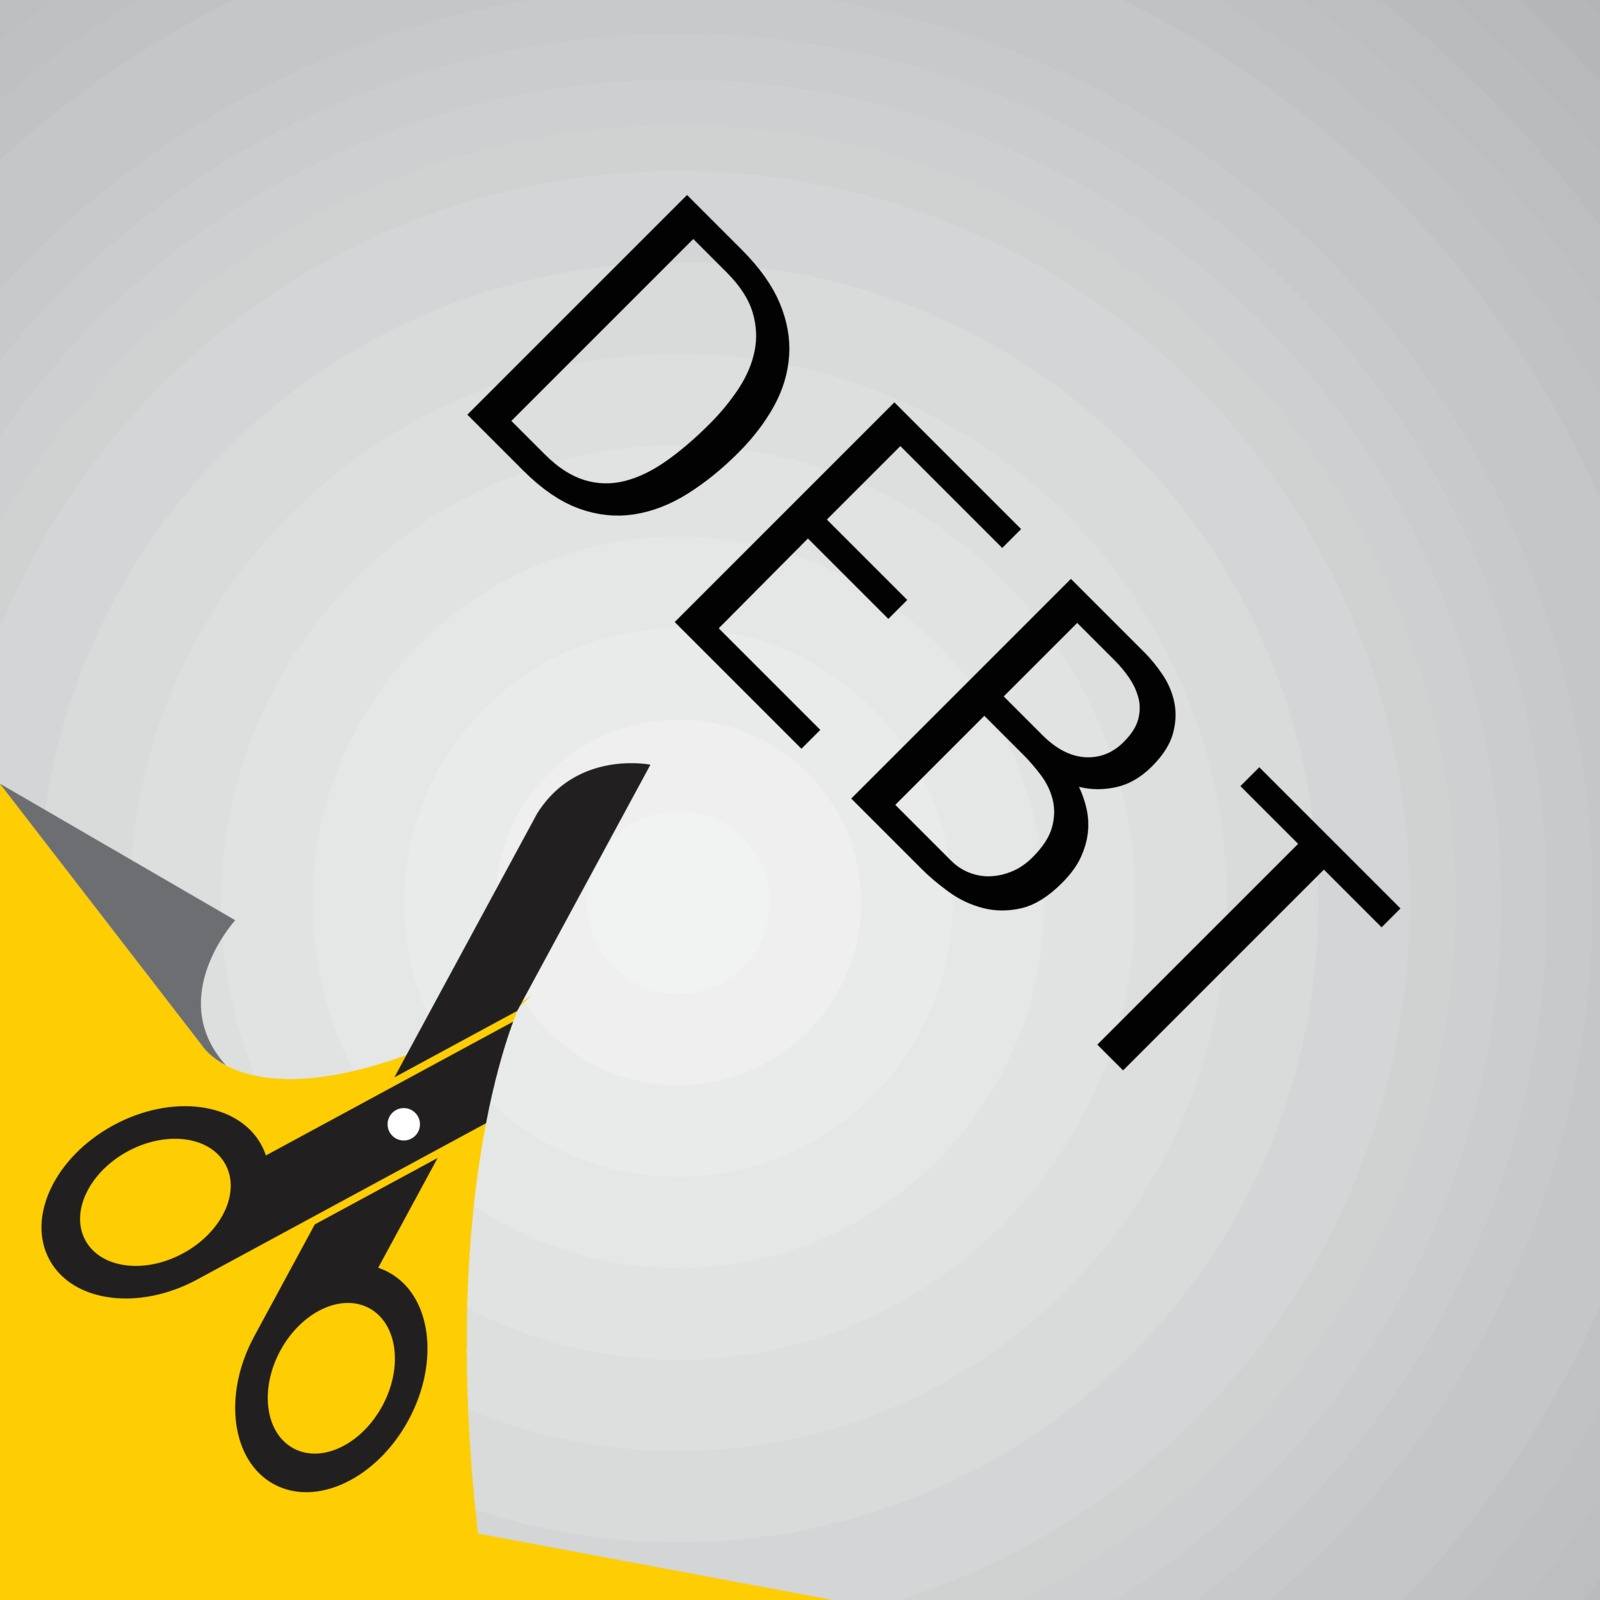 Cut debt concept, representing with scissors cutting banner with message debt. Abstract business and finance background.